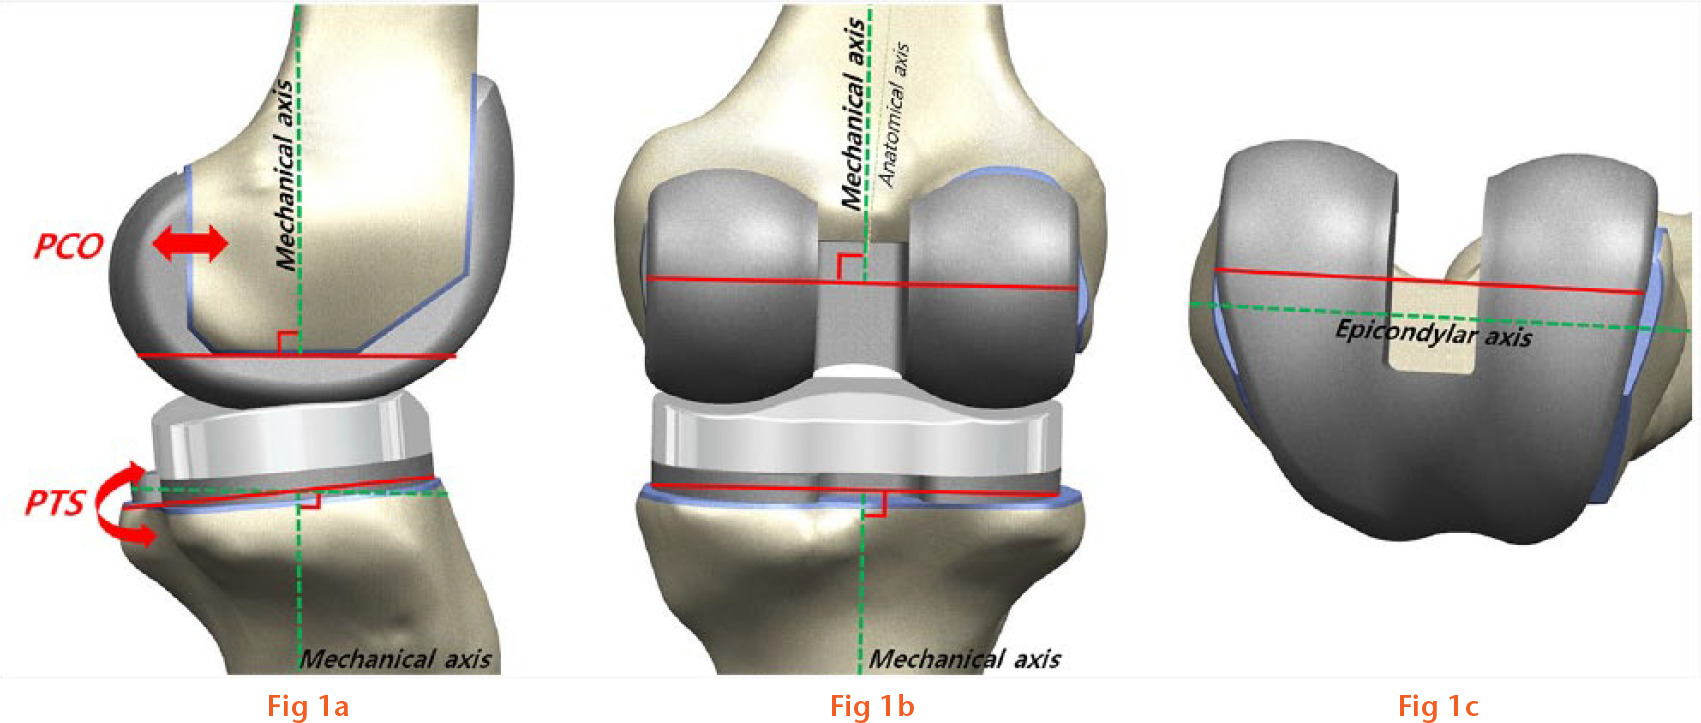  
            Diagram showing the orientation of the total knee arthroplasty used in this study in the a) sagittal plane, b) coronal plane and c) transverse plane (PCO, posterior condylar offset; PTS, posterior tibial slope).
          